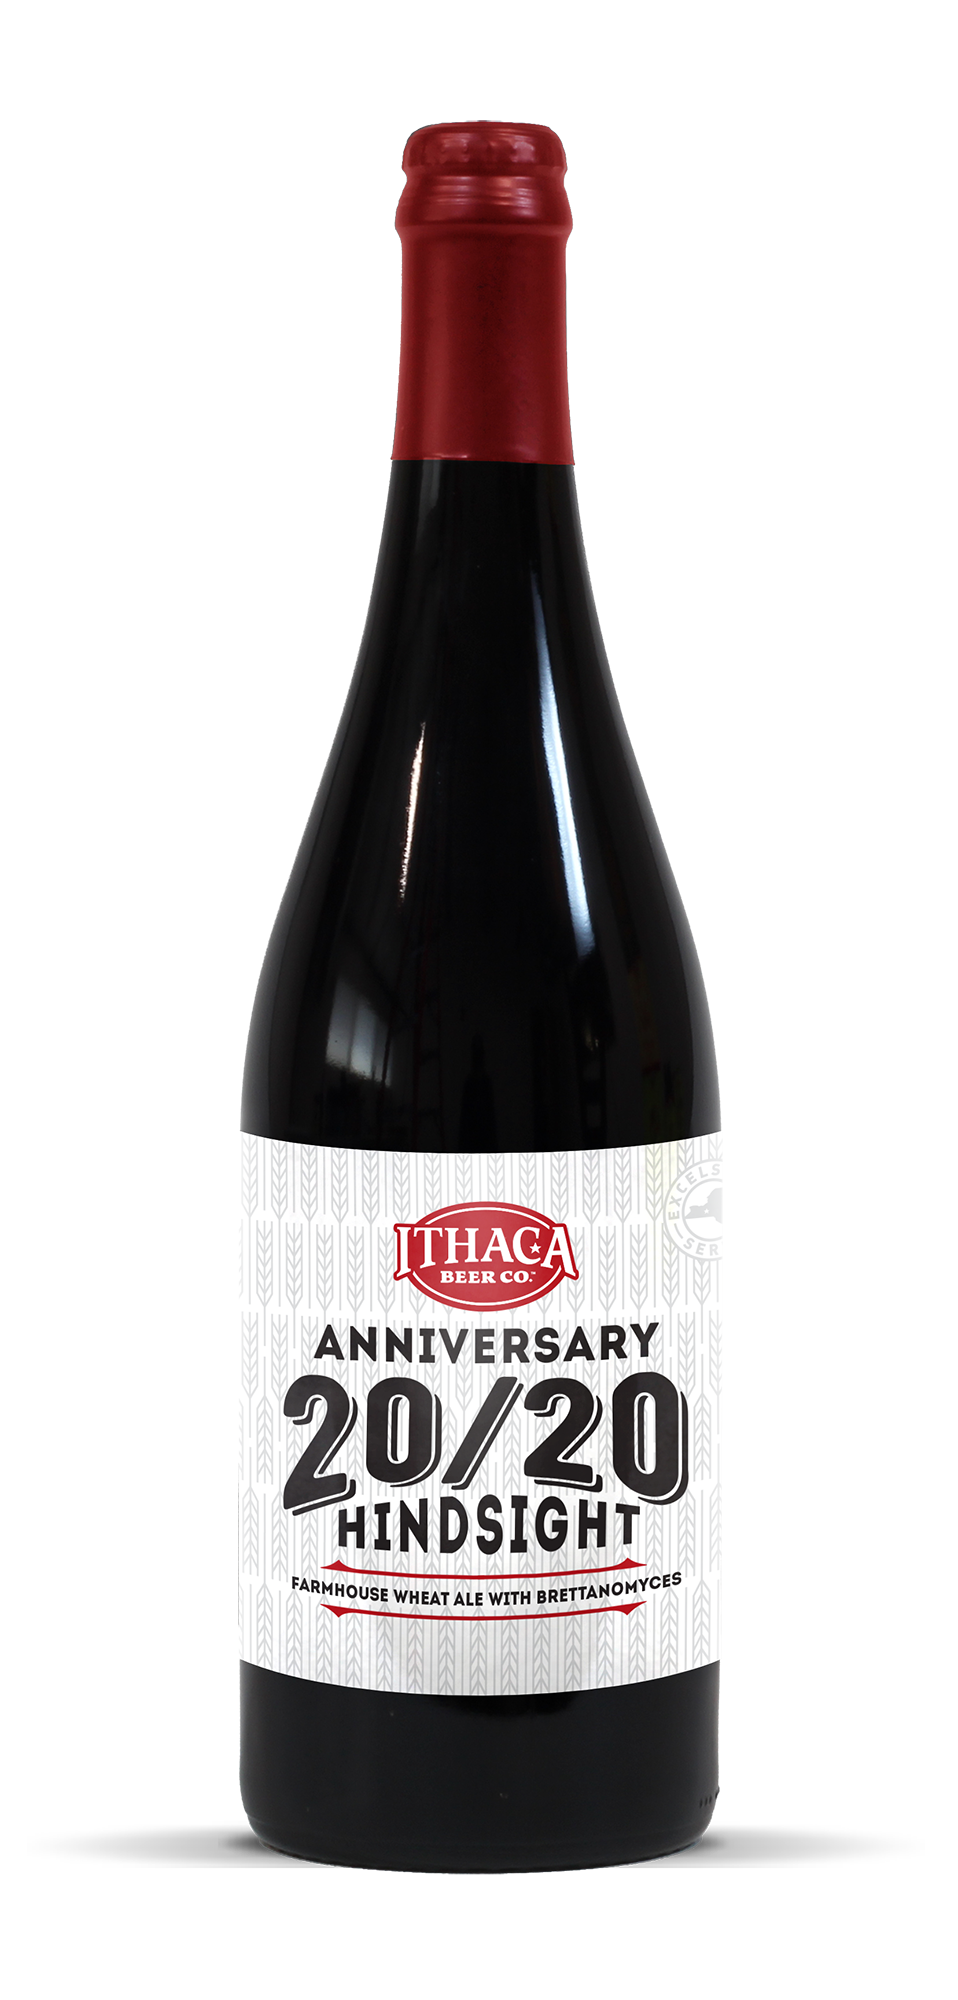 Ithaca Beer Launches Super Stout as a Year Round Brand in 2016